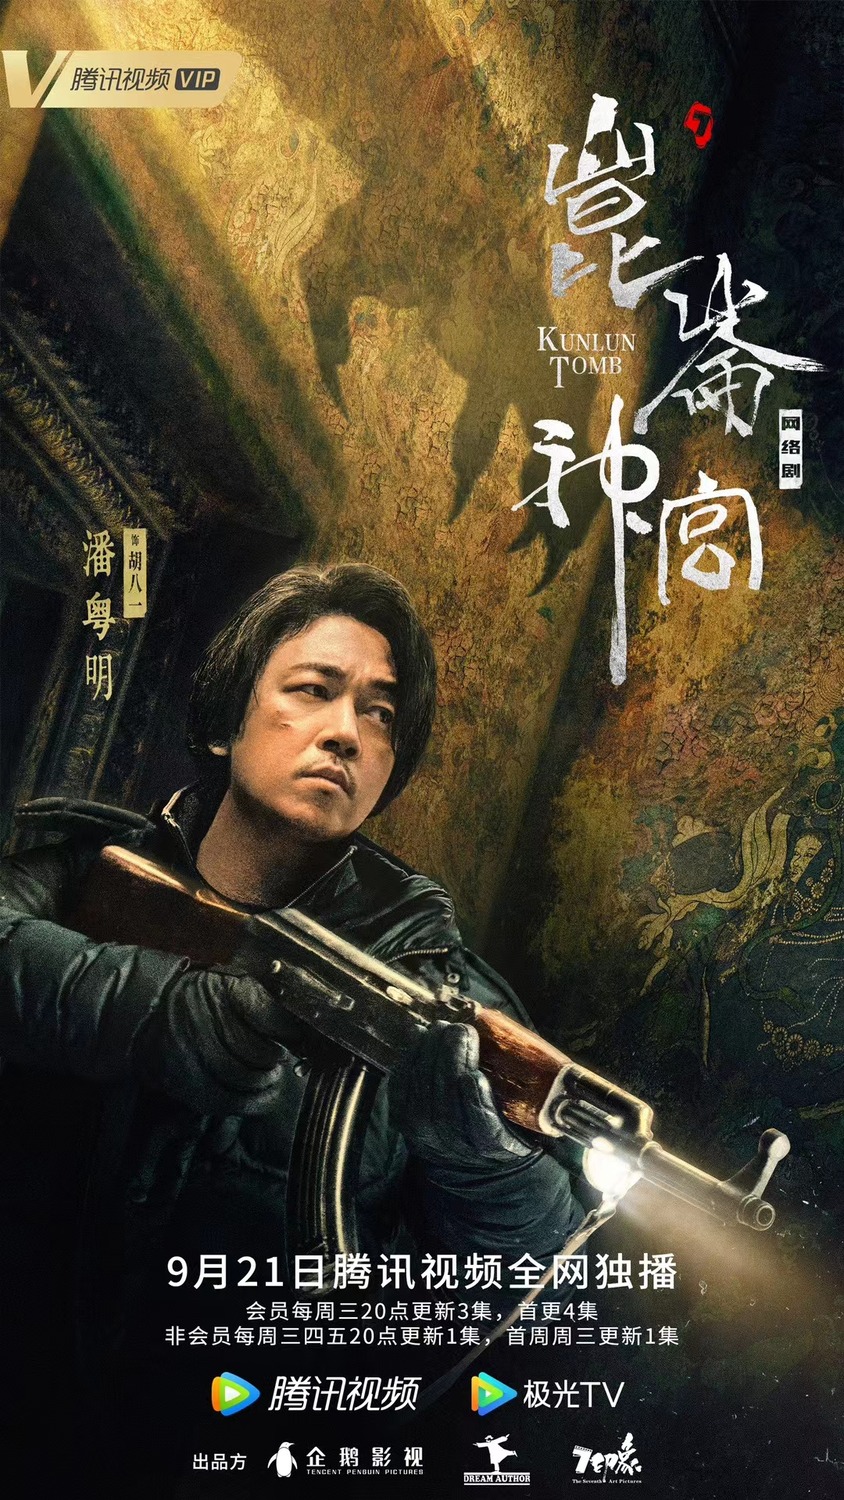 Extra Large TV Poster Image for Candle in the Tomb: Kunlun Tomb (#6 of 8)